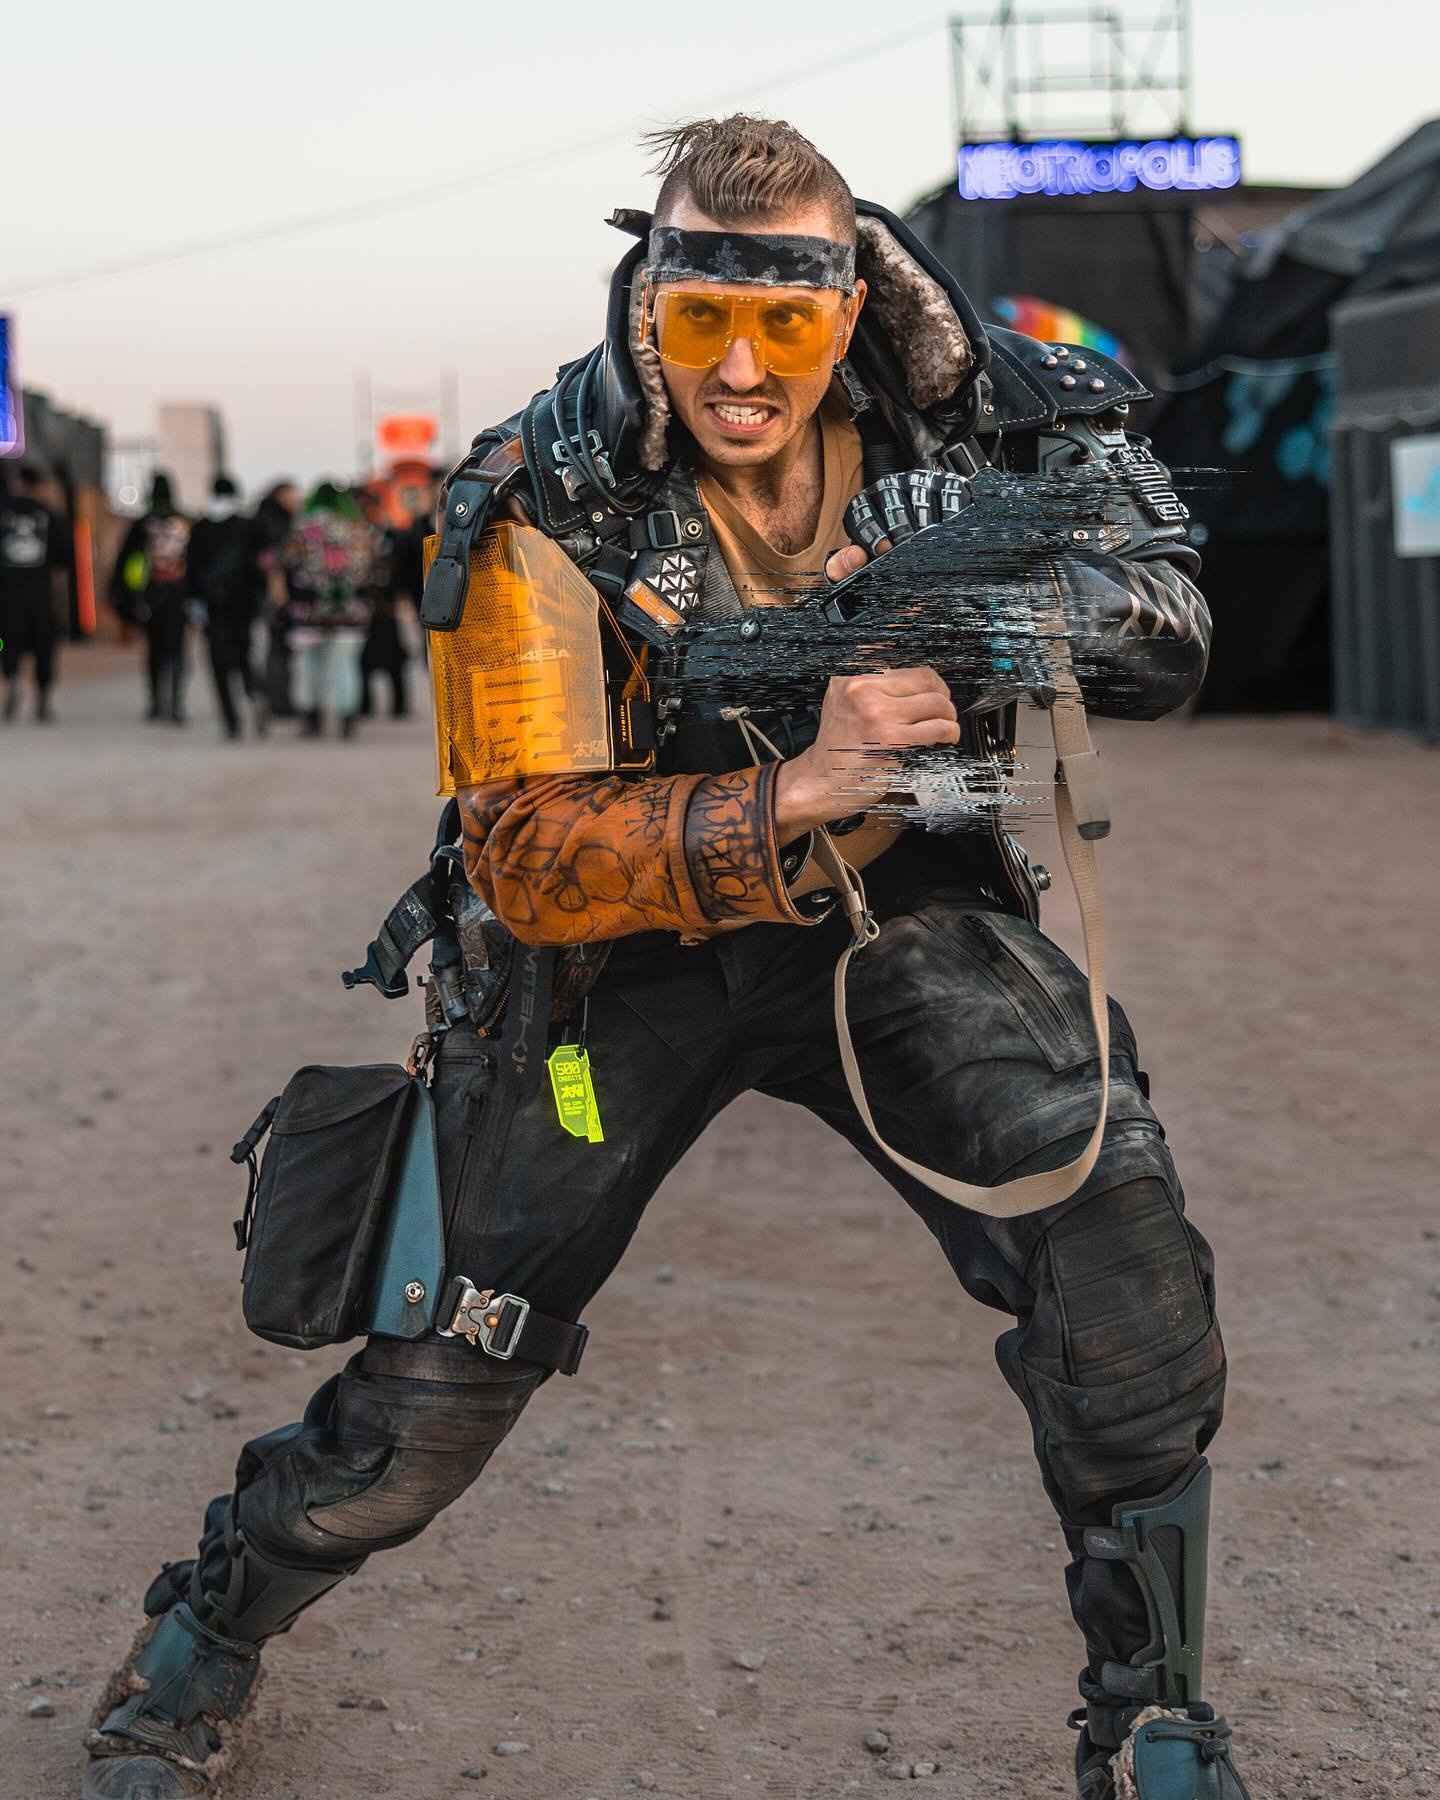 How many creds did this guy take from you?

I love my cyberpunk space gangster. One of my favorite builds yet, and was such a blast to wear out to @neotropolisevent this year. 

Really love how the whole fit came together, especially the custom taper